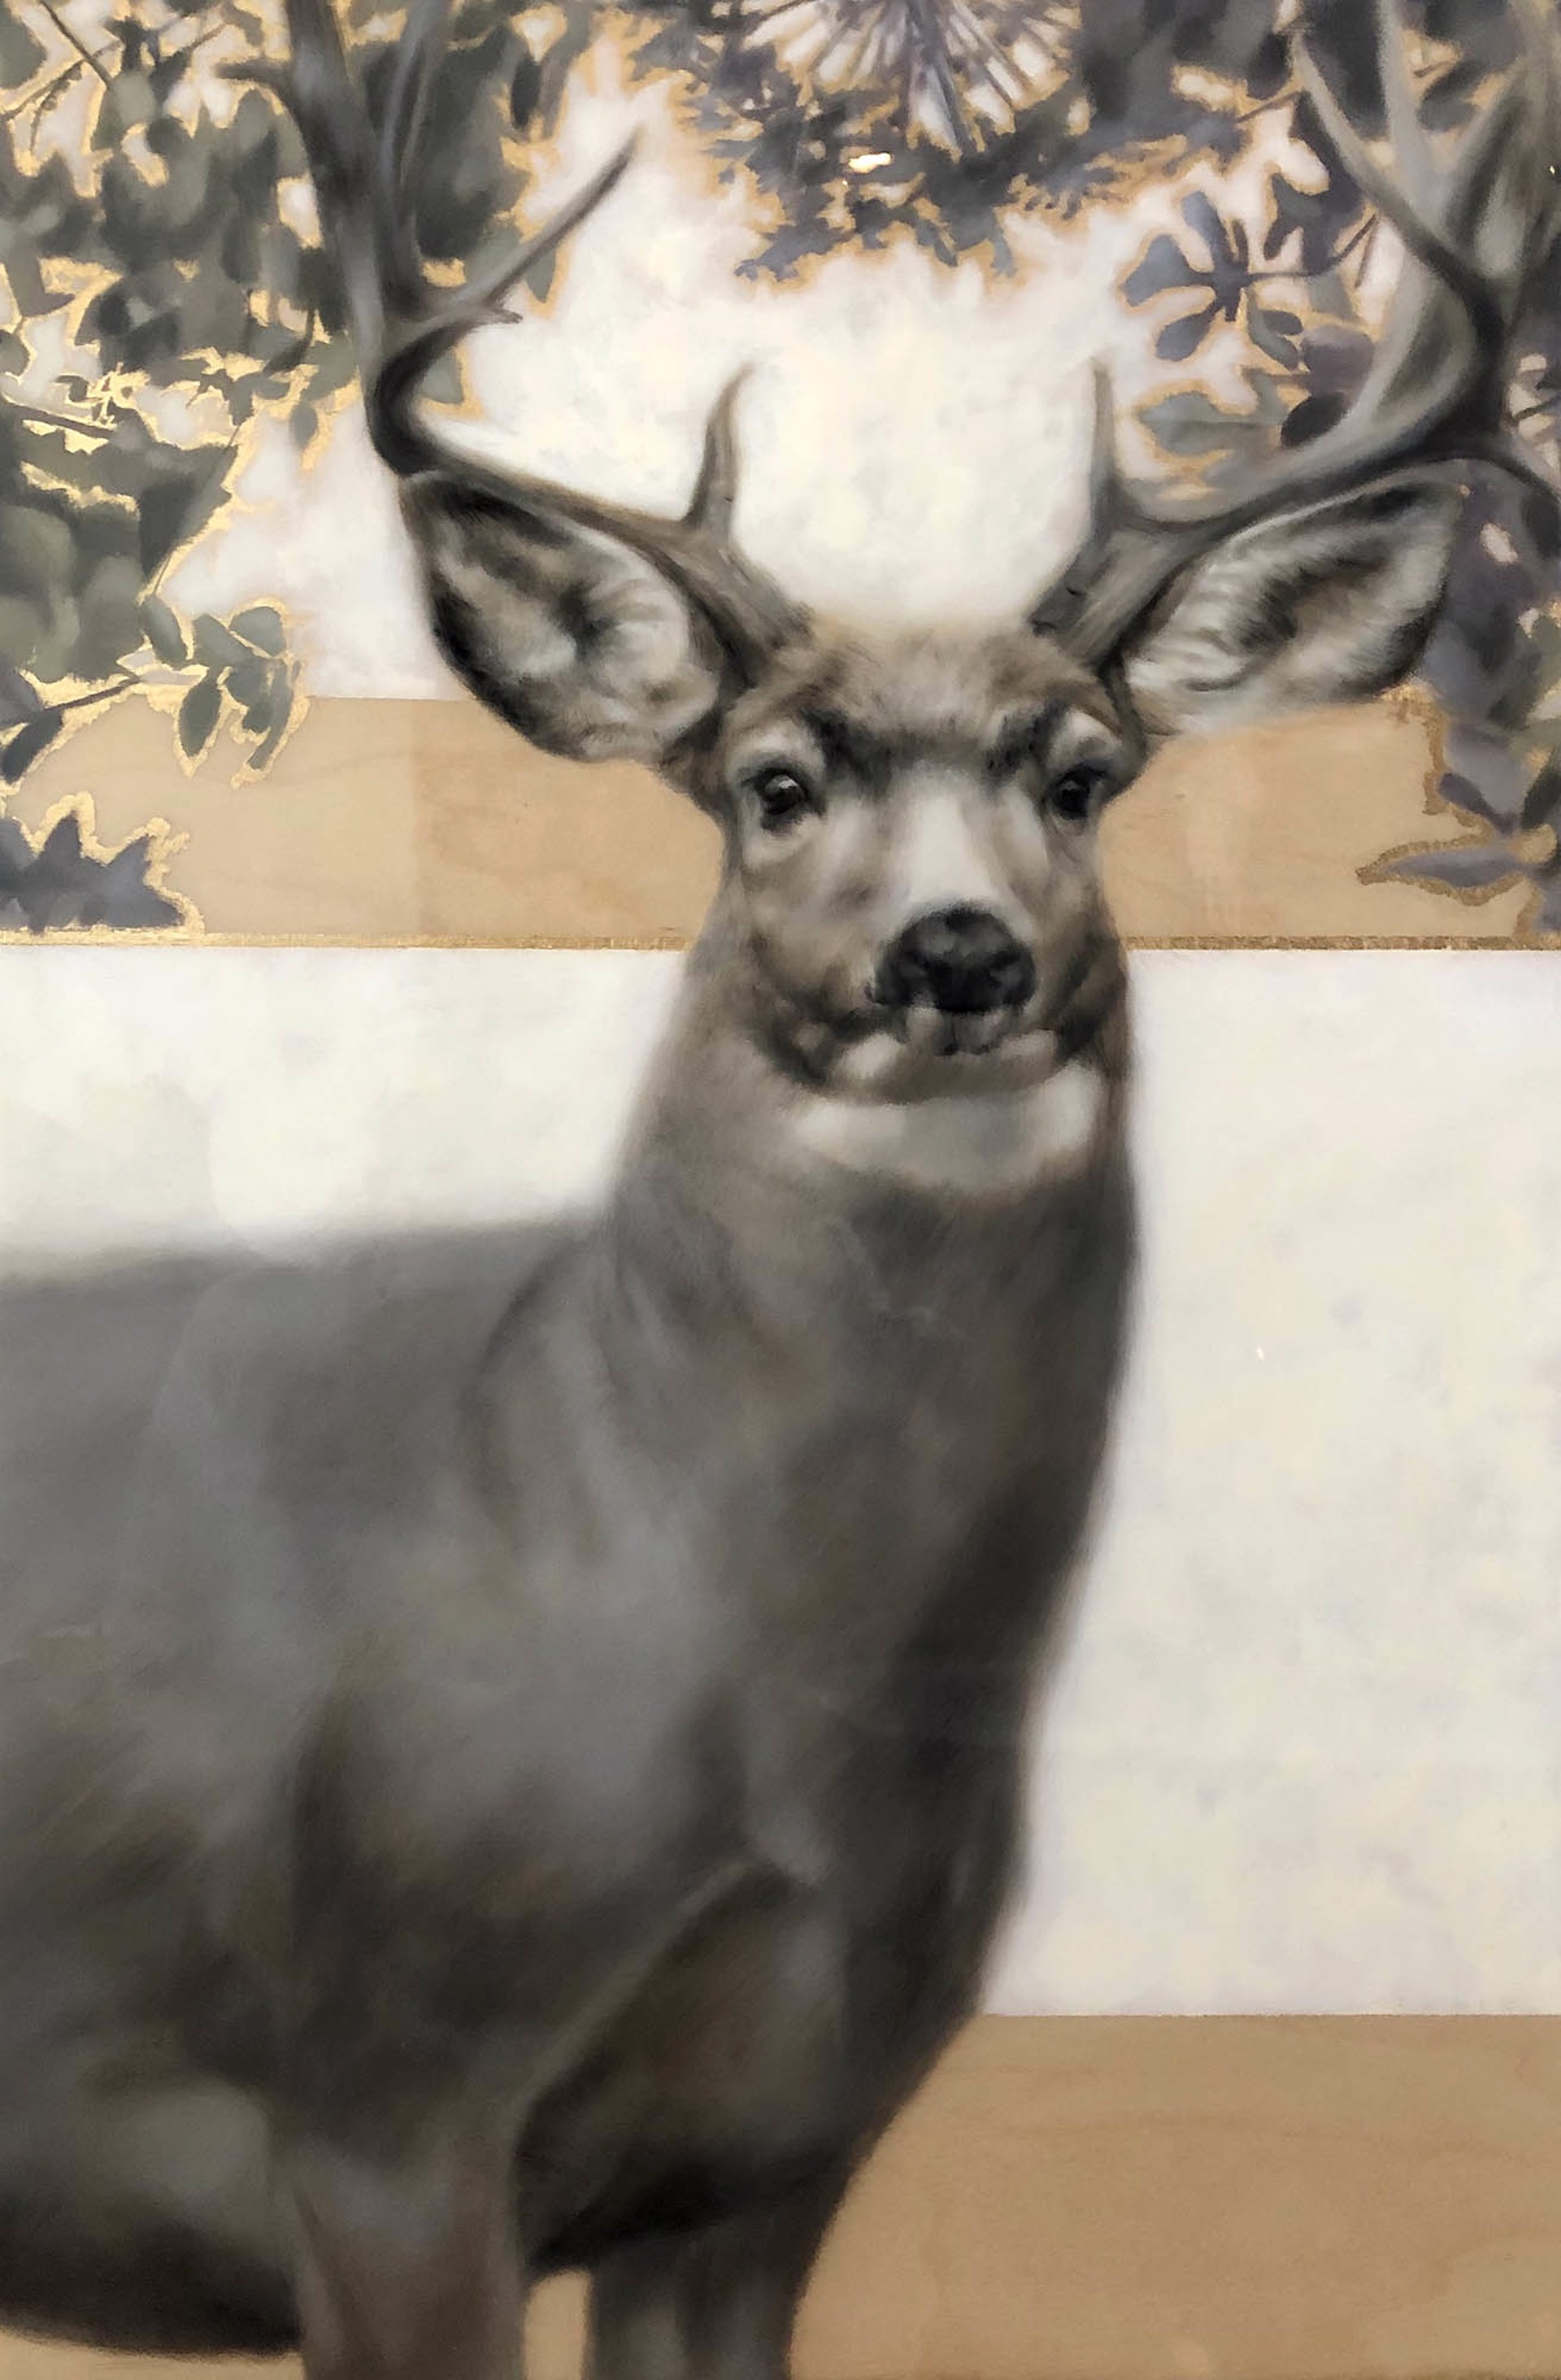 Original Artwork Featuring A Buck Deer Painted On Abstract Wood Panel Background With Gold Leaf Detail